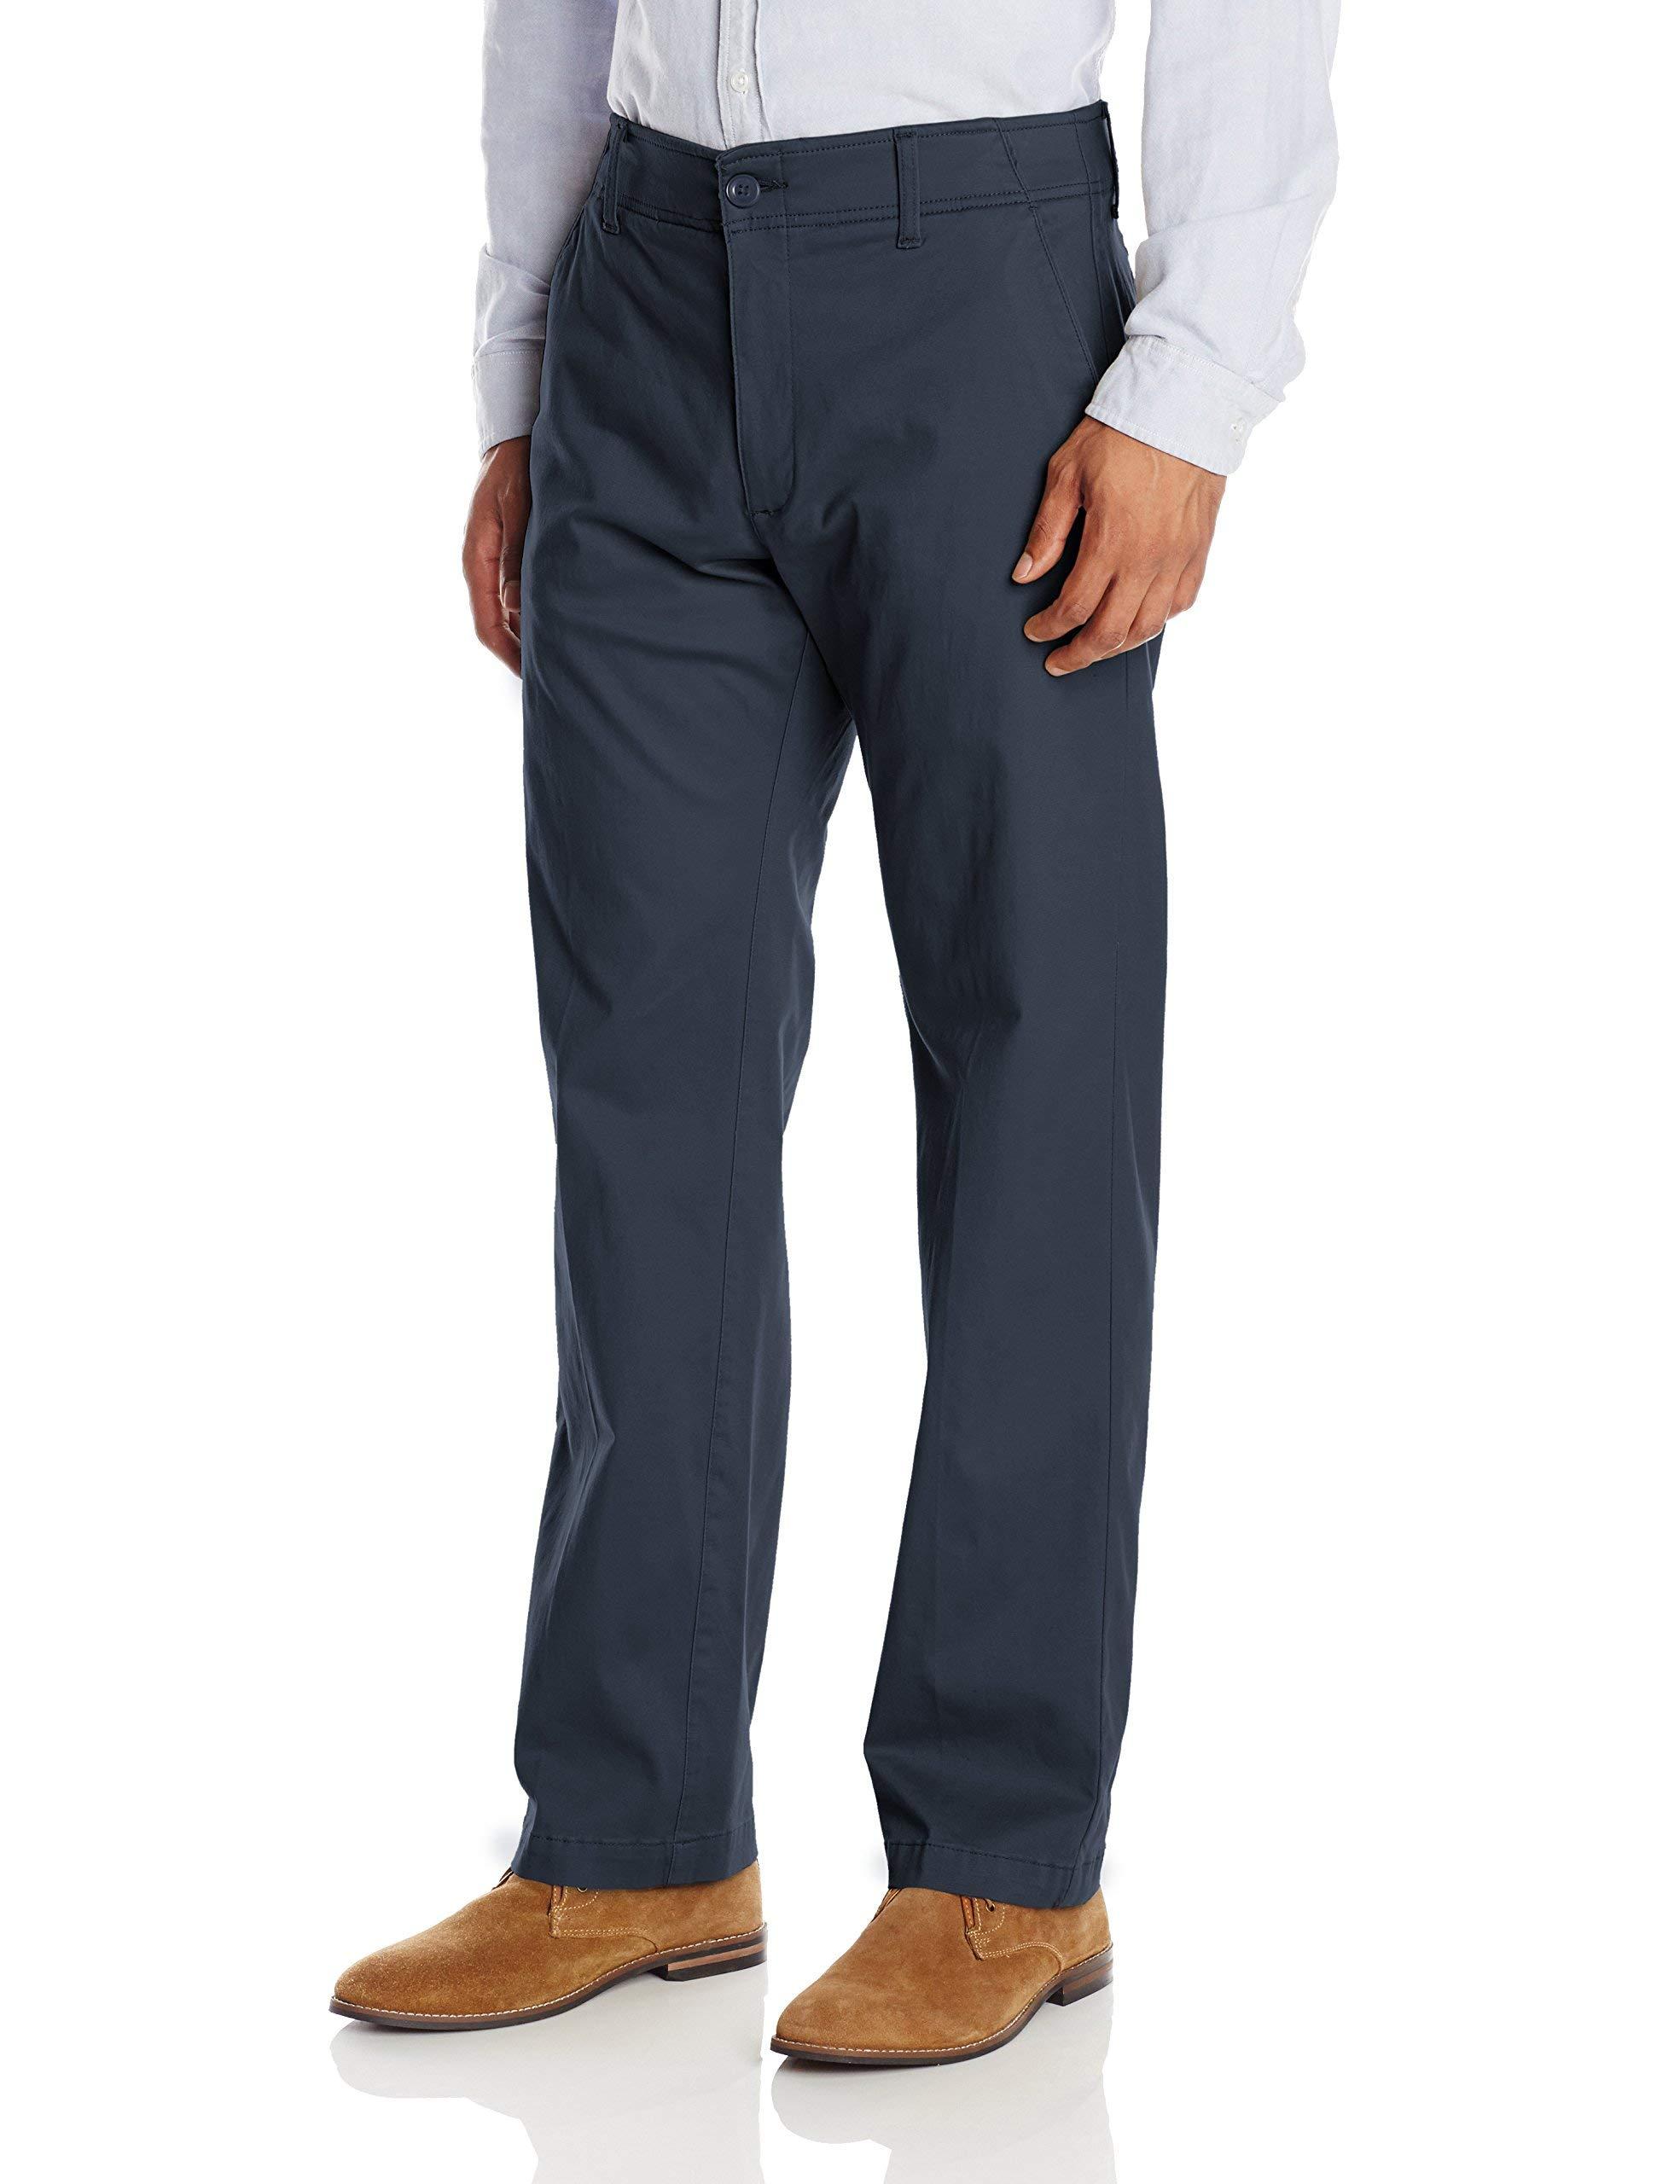 Lee Jeans Big & Tall Performance Series Extreme Comfort Pant in Navy ...